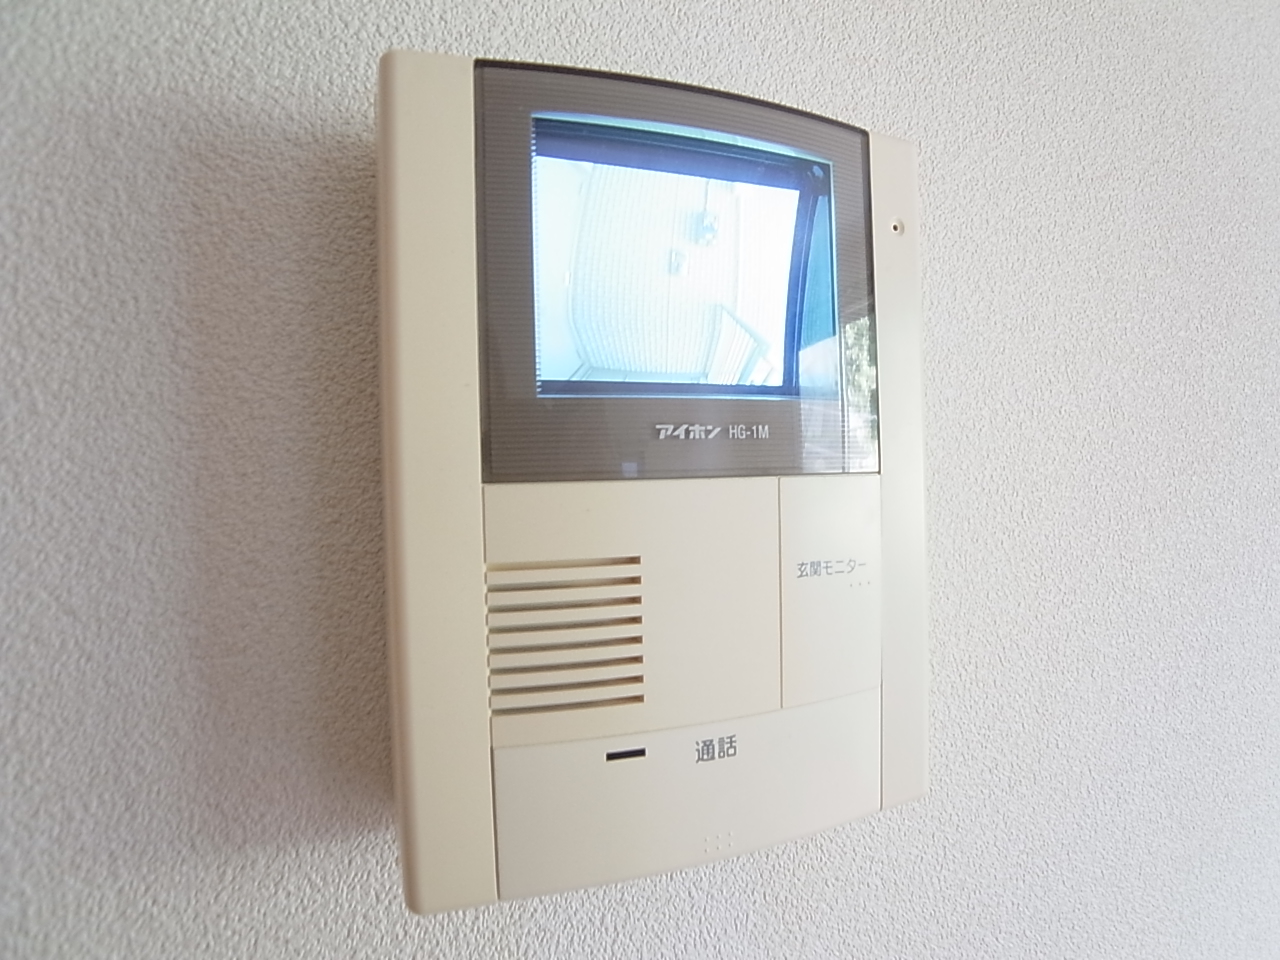 Security. With TV Intercom, Correspondence is relieved to be after the visitor confirmation